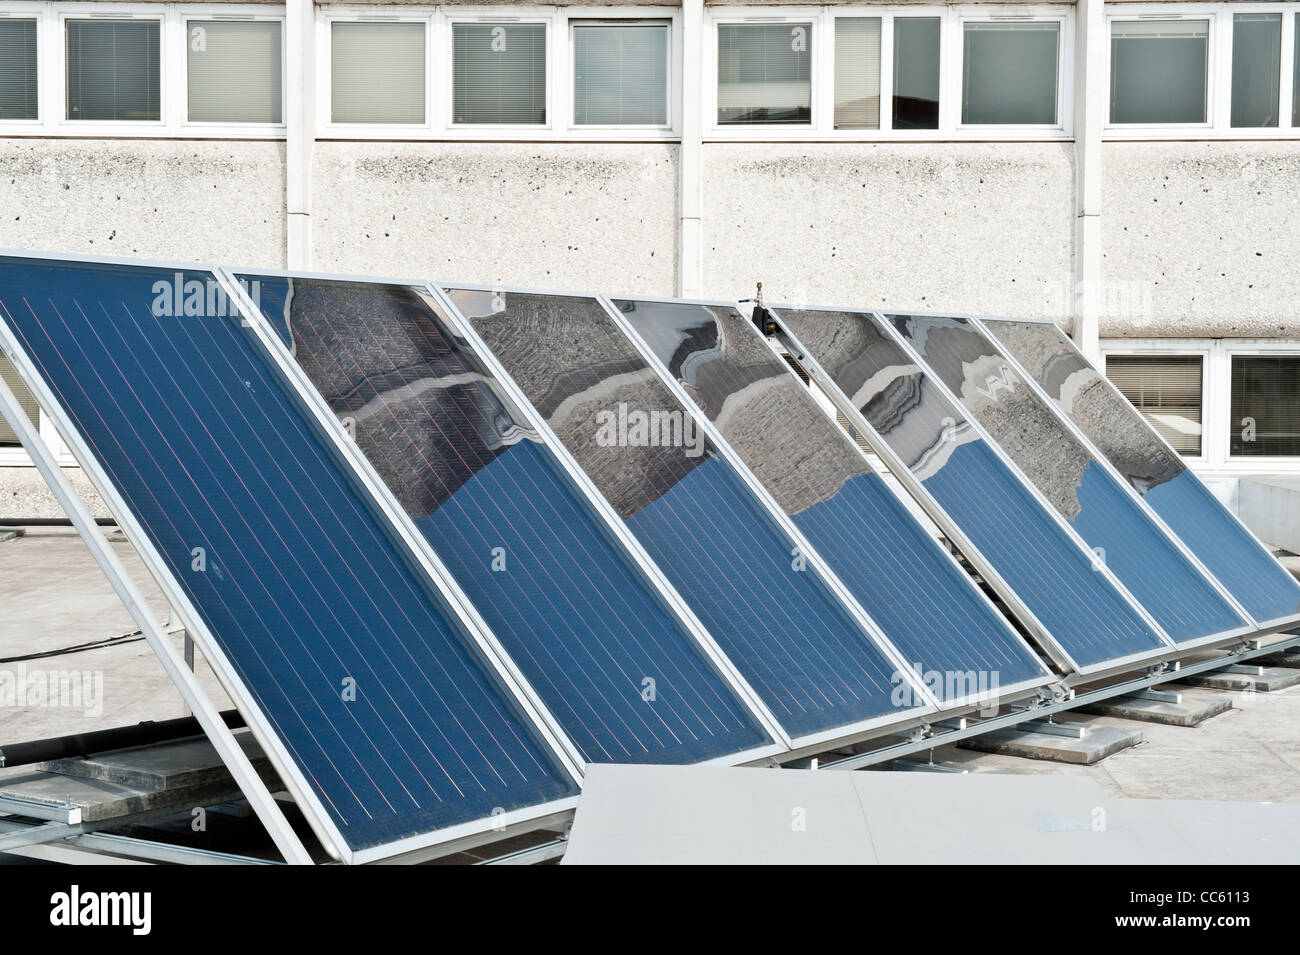 Solar panels for solar water heating on a rooftop. Stock Photo